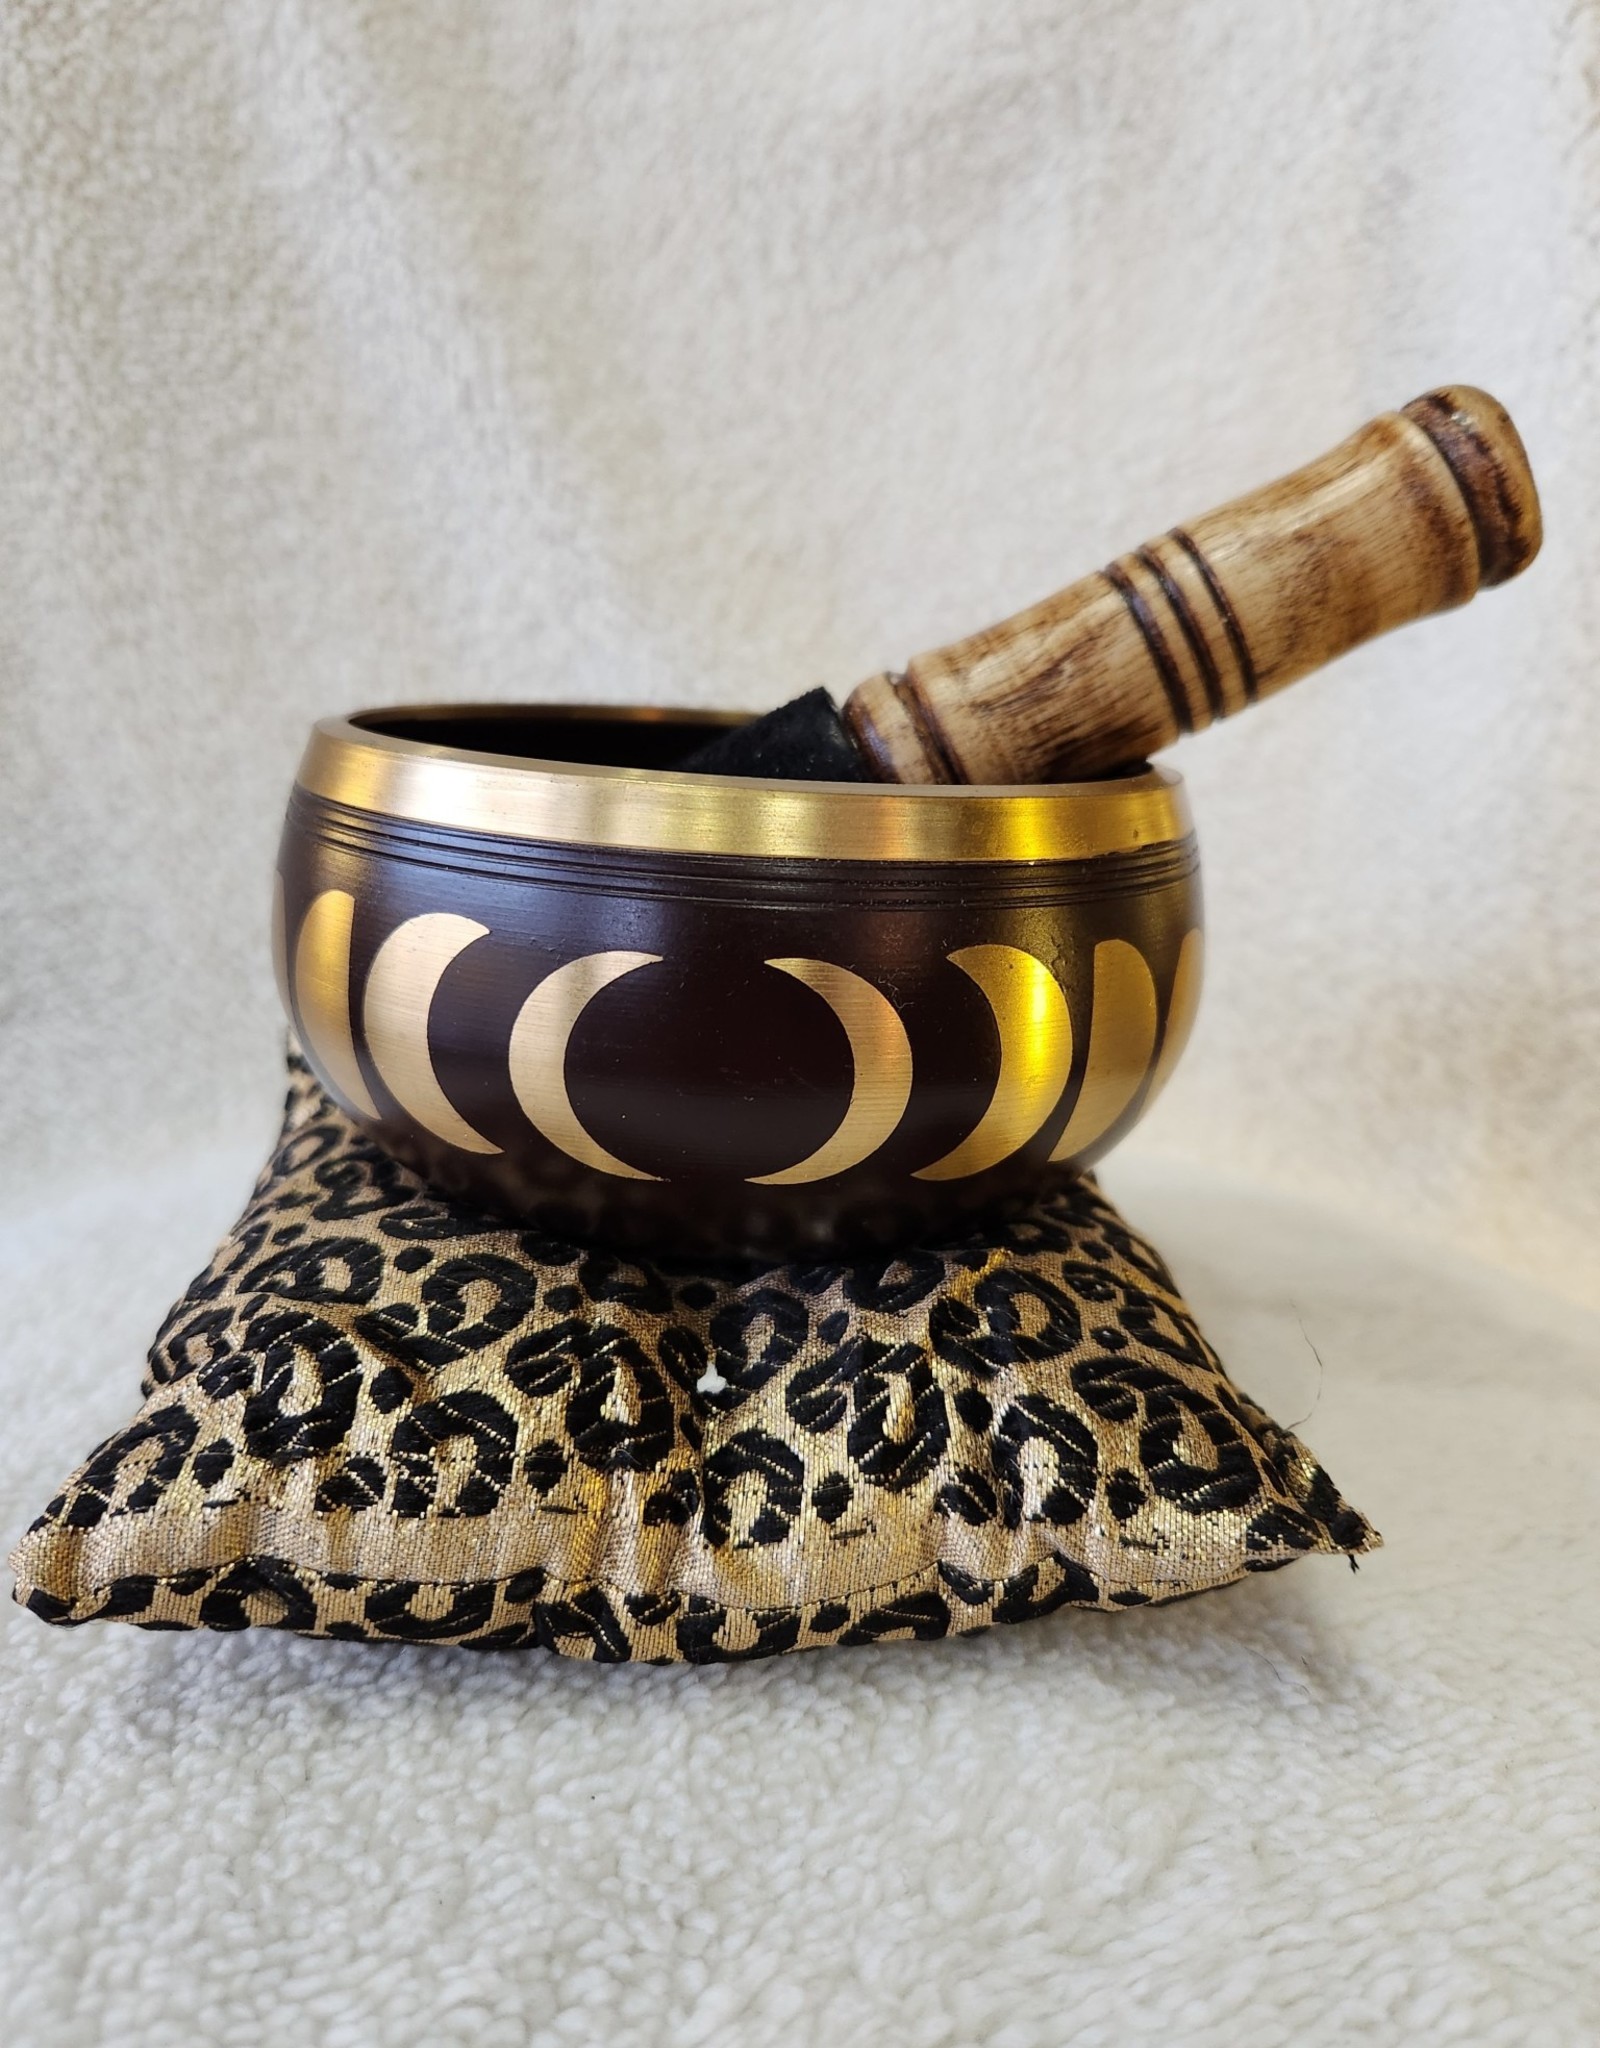 Tibetan Singing Bowl Phases of the Moon